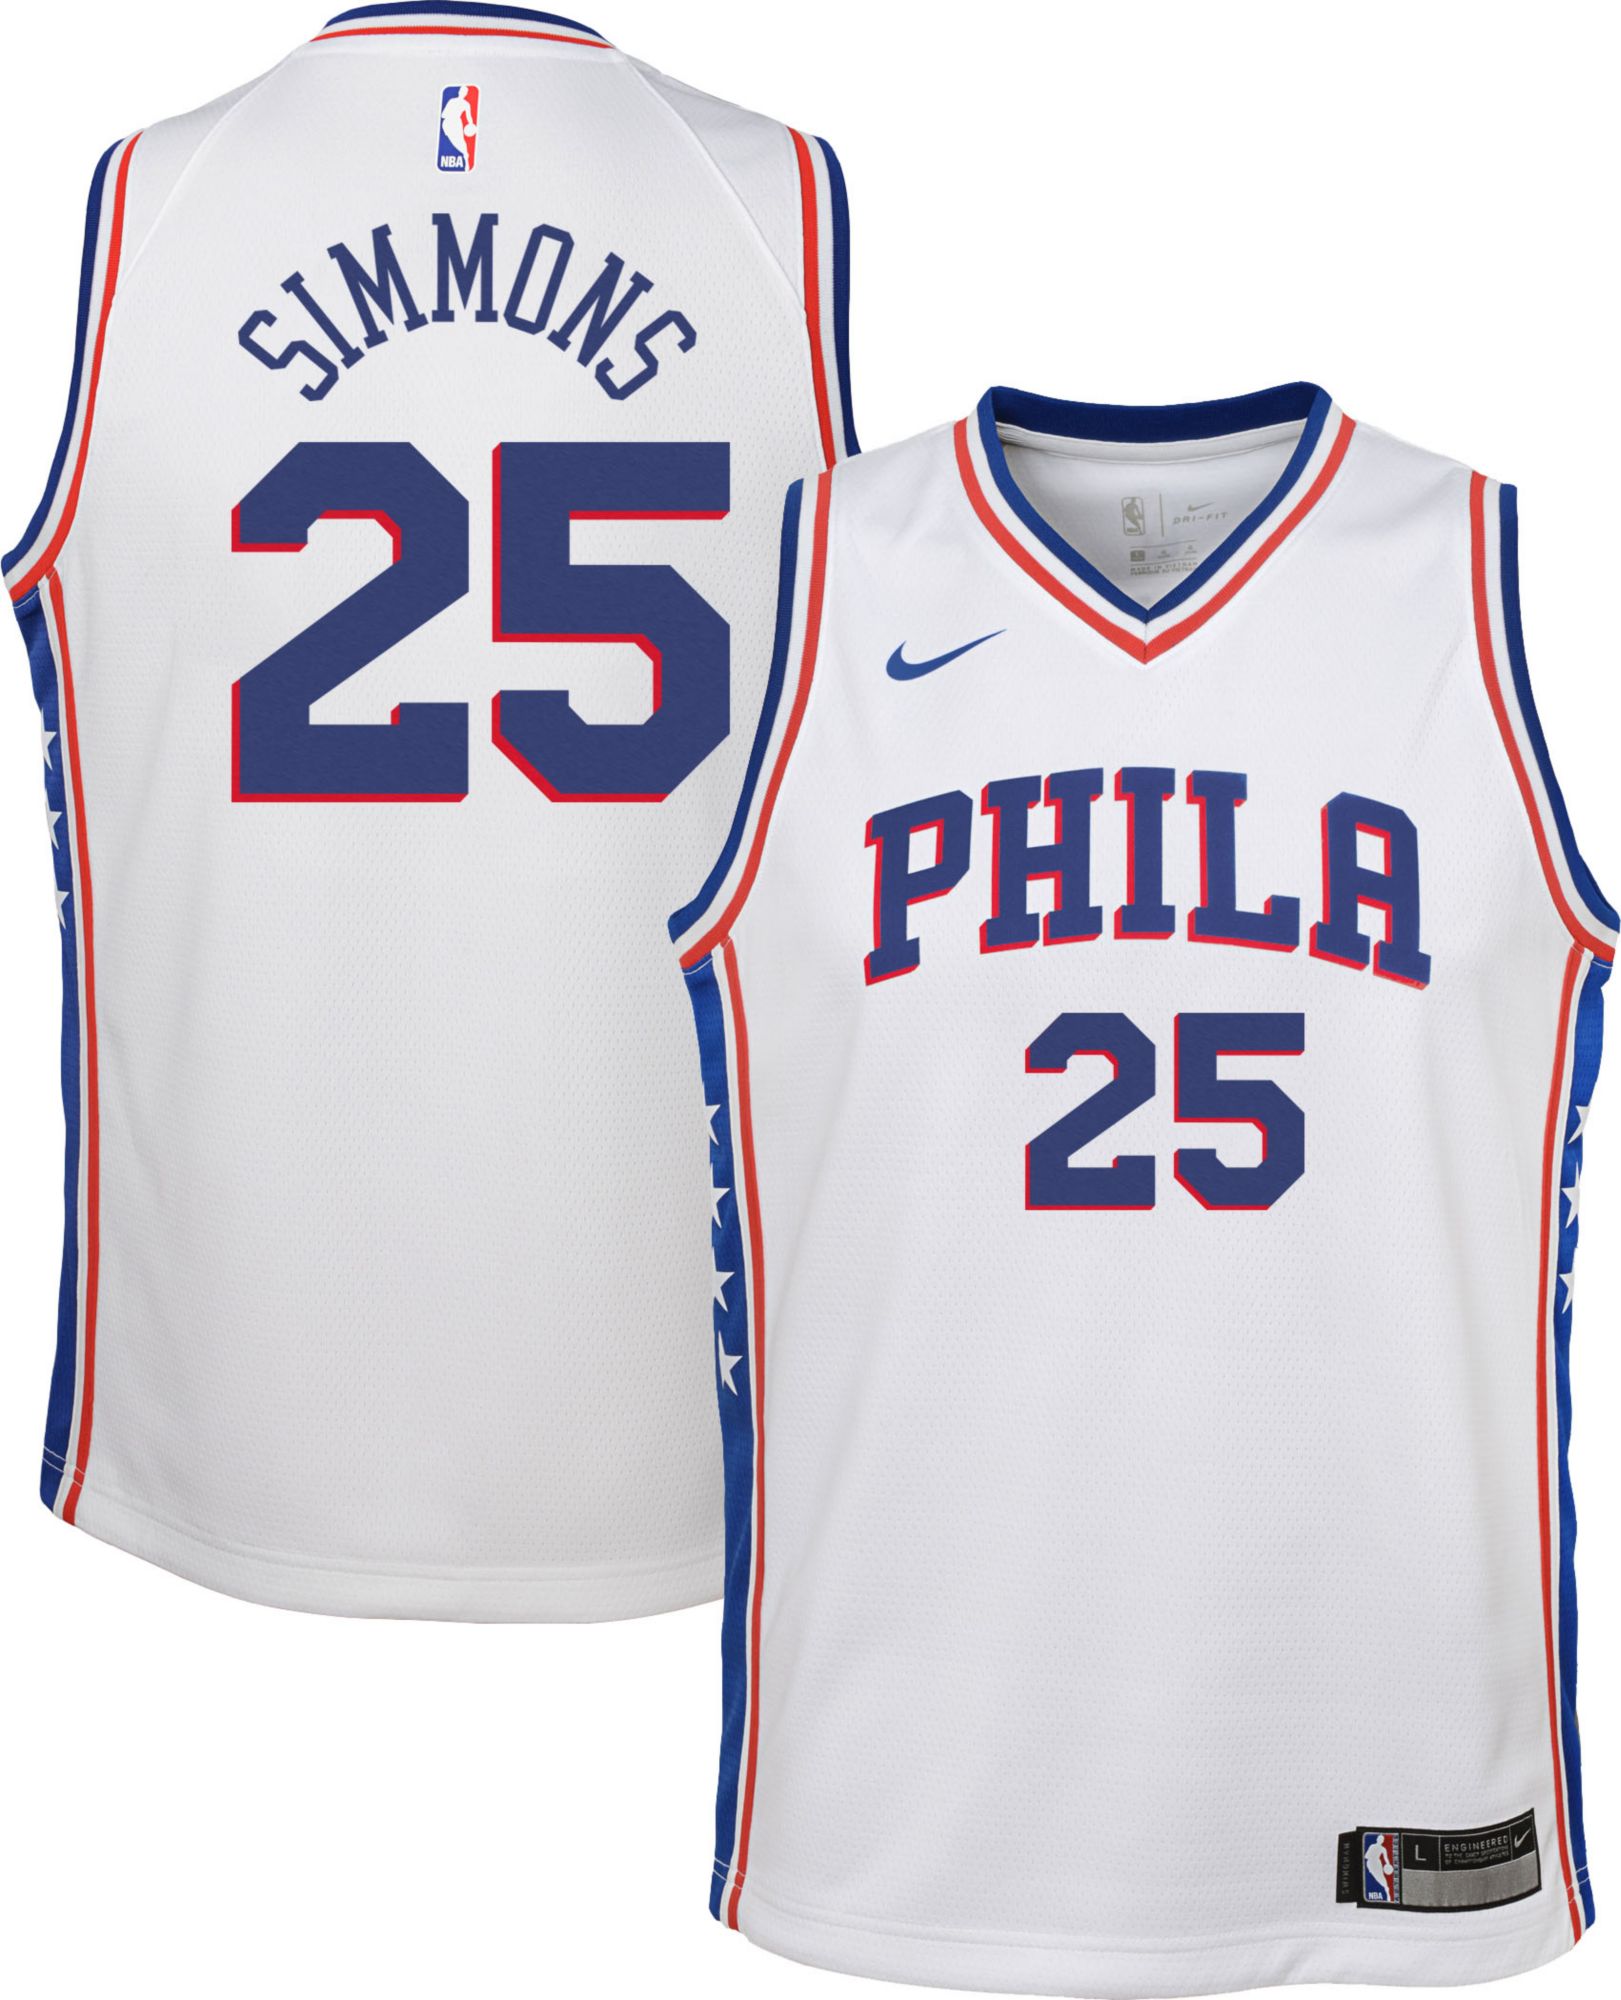 76ers white jersey